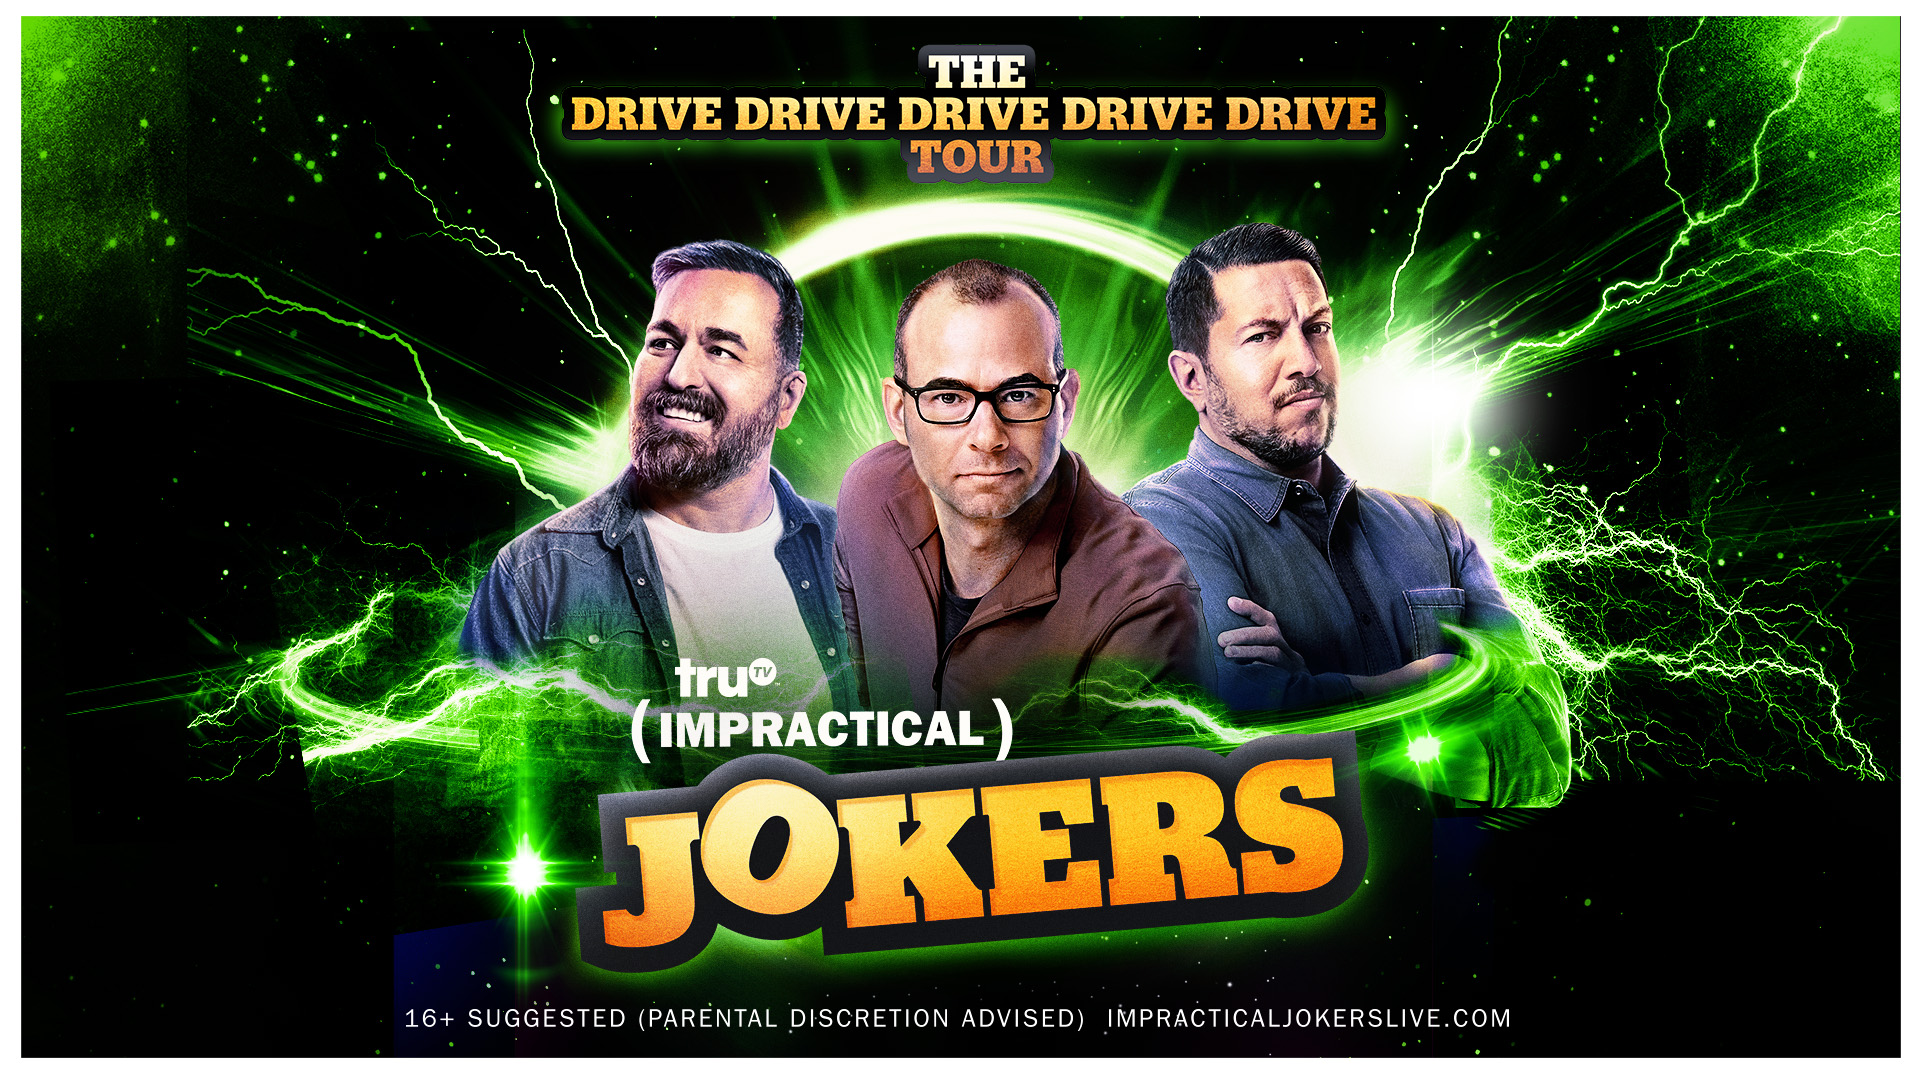 is the impractical jokers tour good